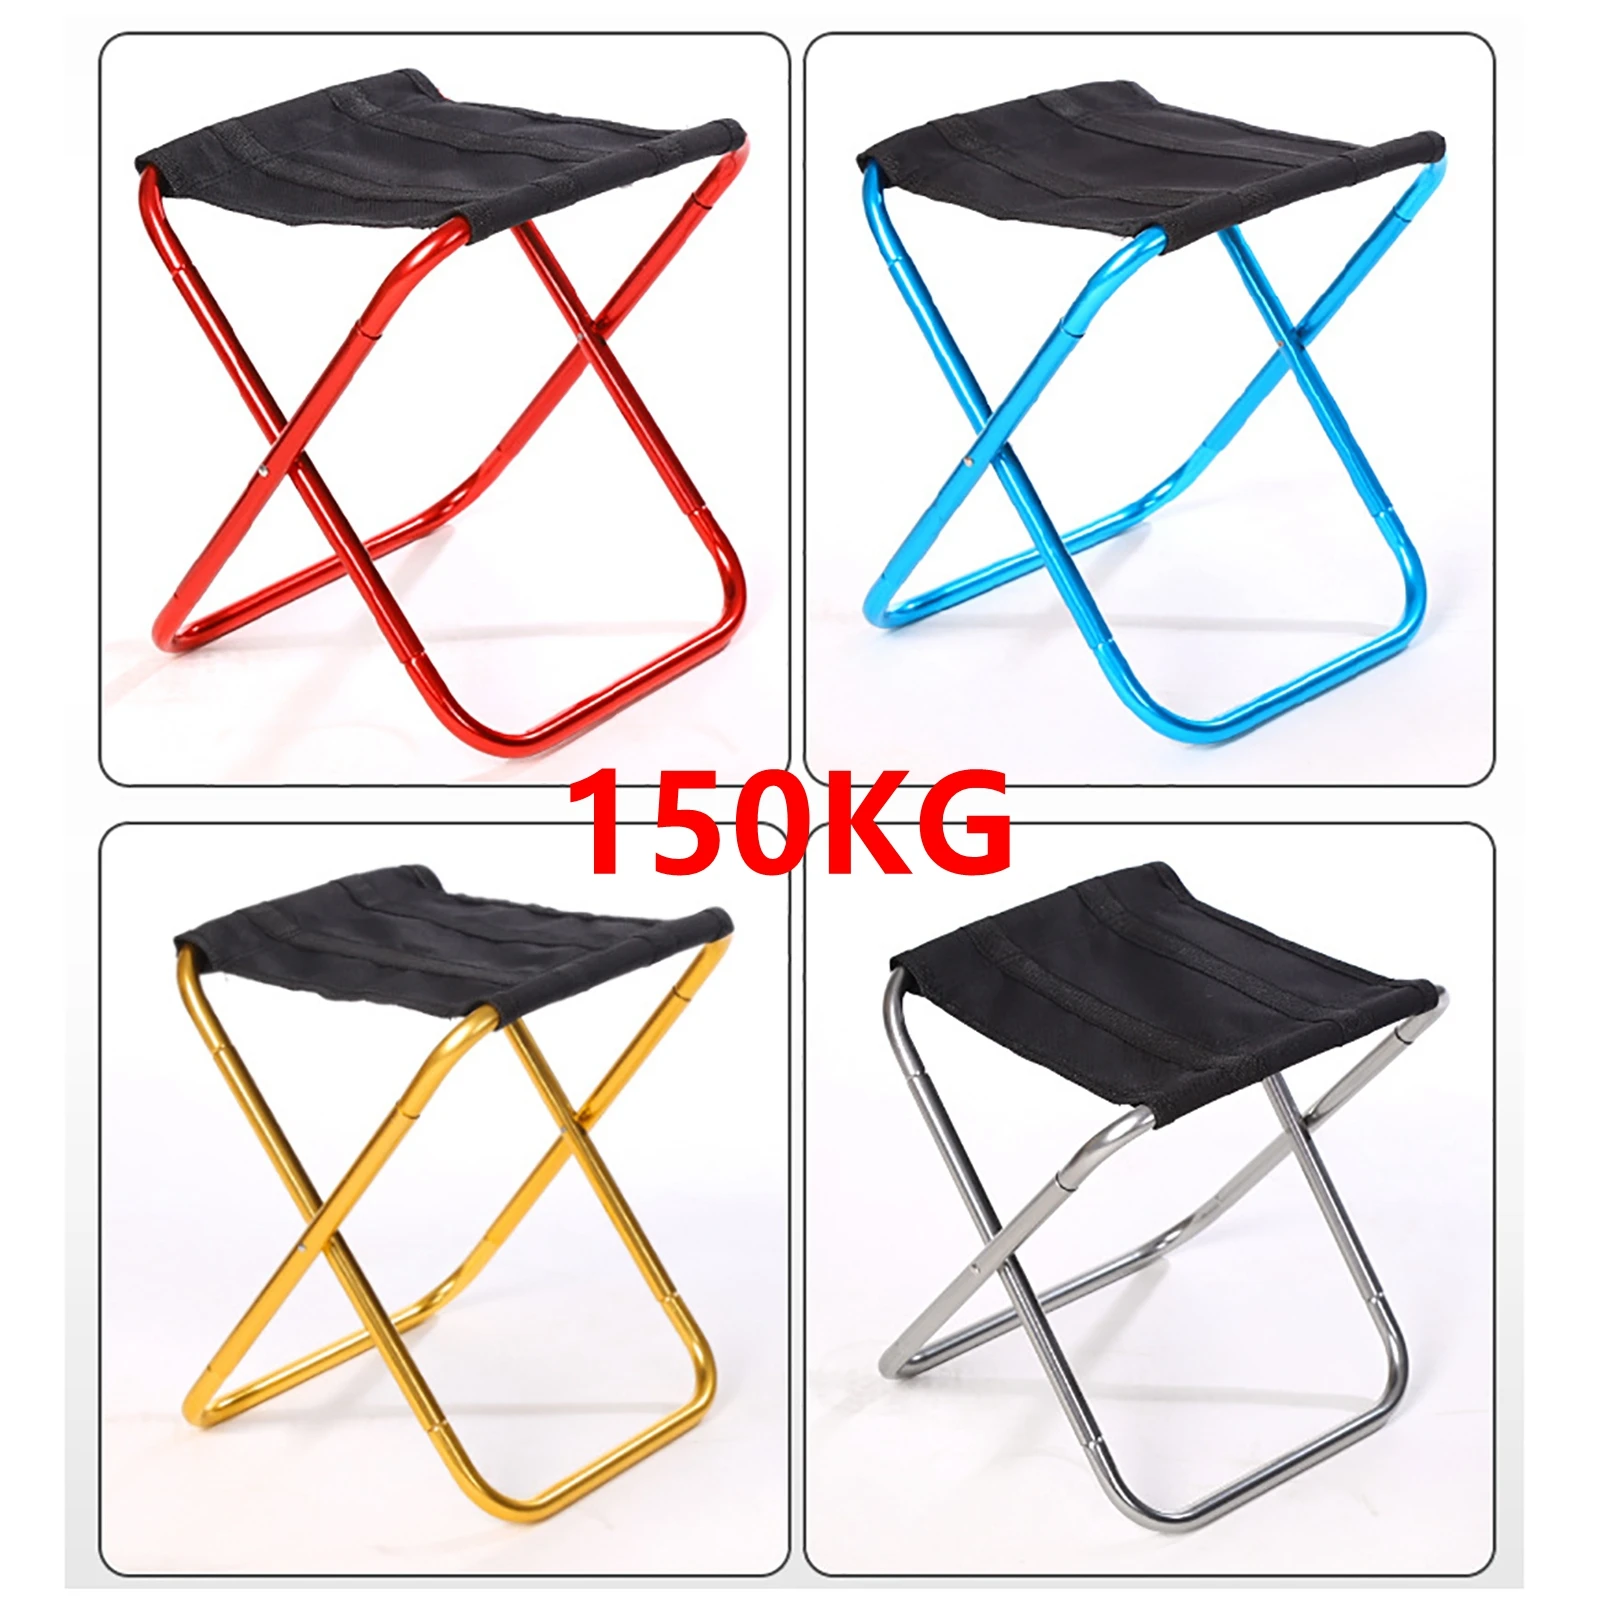 150KG Thickened Outdoor Camping Small Chair Portable Folding Aluminum Alloy Stool Bench Stool Mare Ultralight Picnic Fishing New enlarge